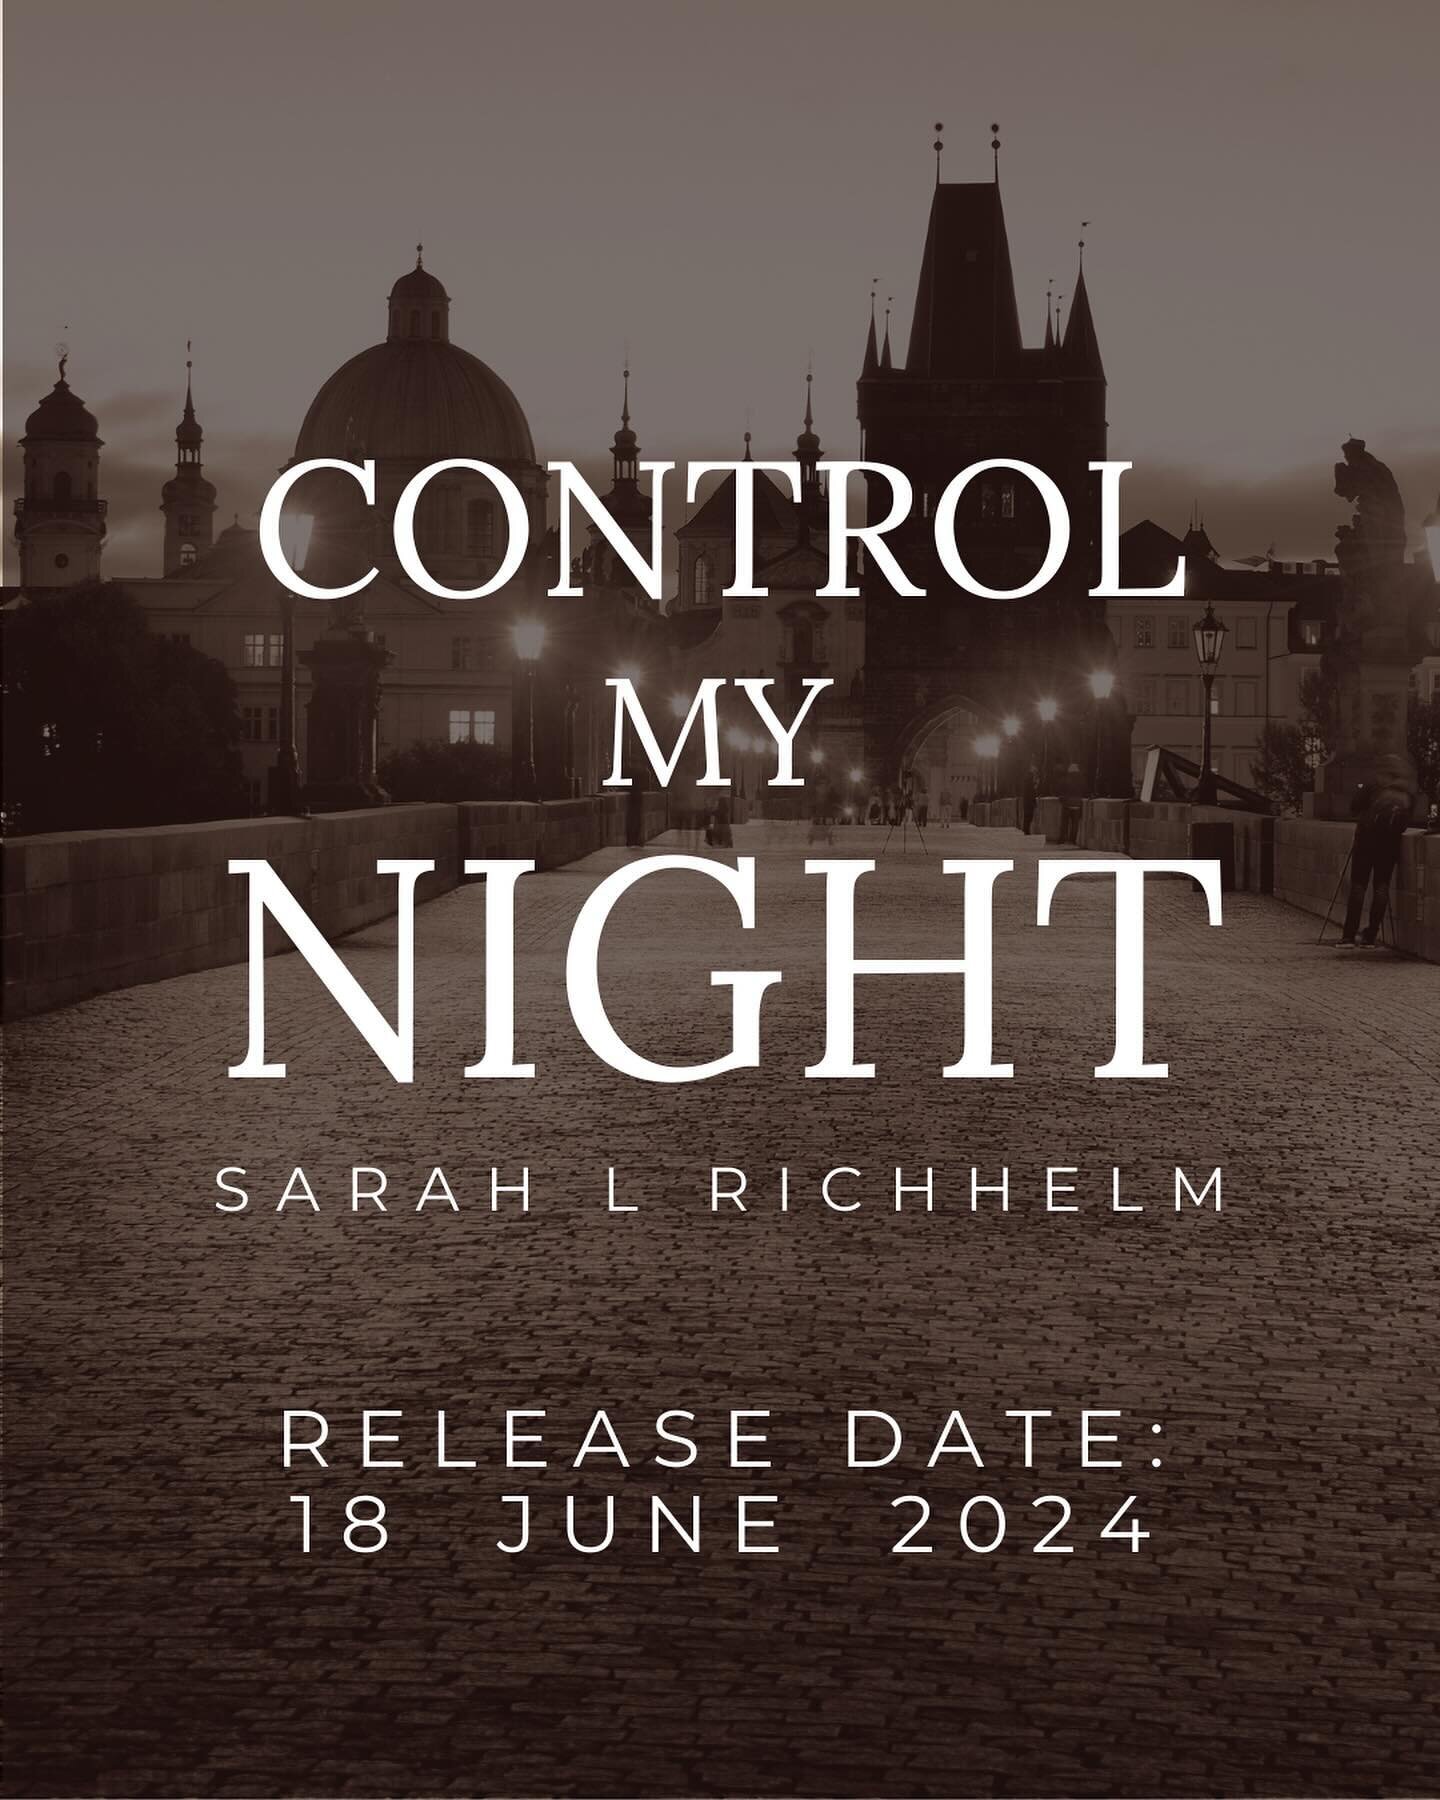 ✨ Control My Night is releasing 18 June 2024 ✨

It&rsquo;s official! My debut urban fantasy romance is coming VERY soon 🤎 104 days away, to be exact?!

*screams* 

I&rsquo;m so excited to share it with you all! This story is a love letter to the peo